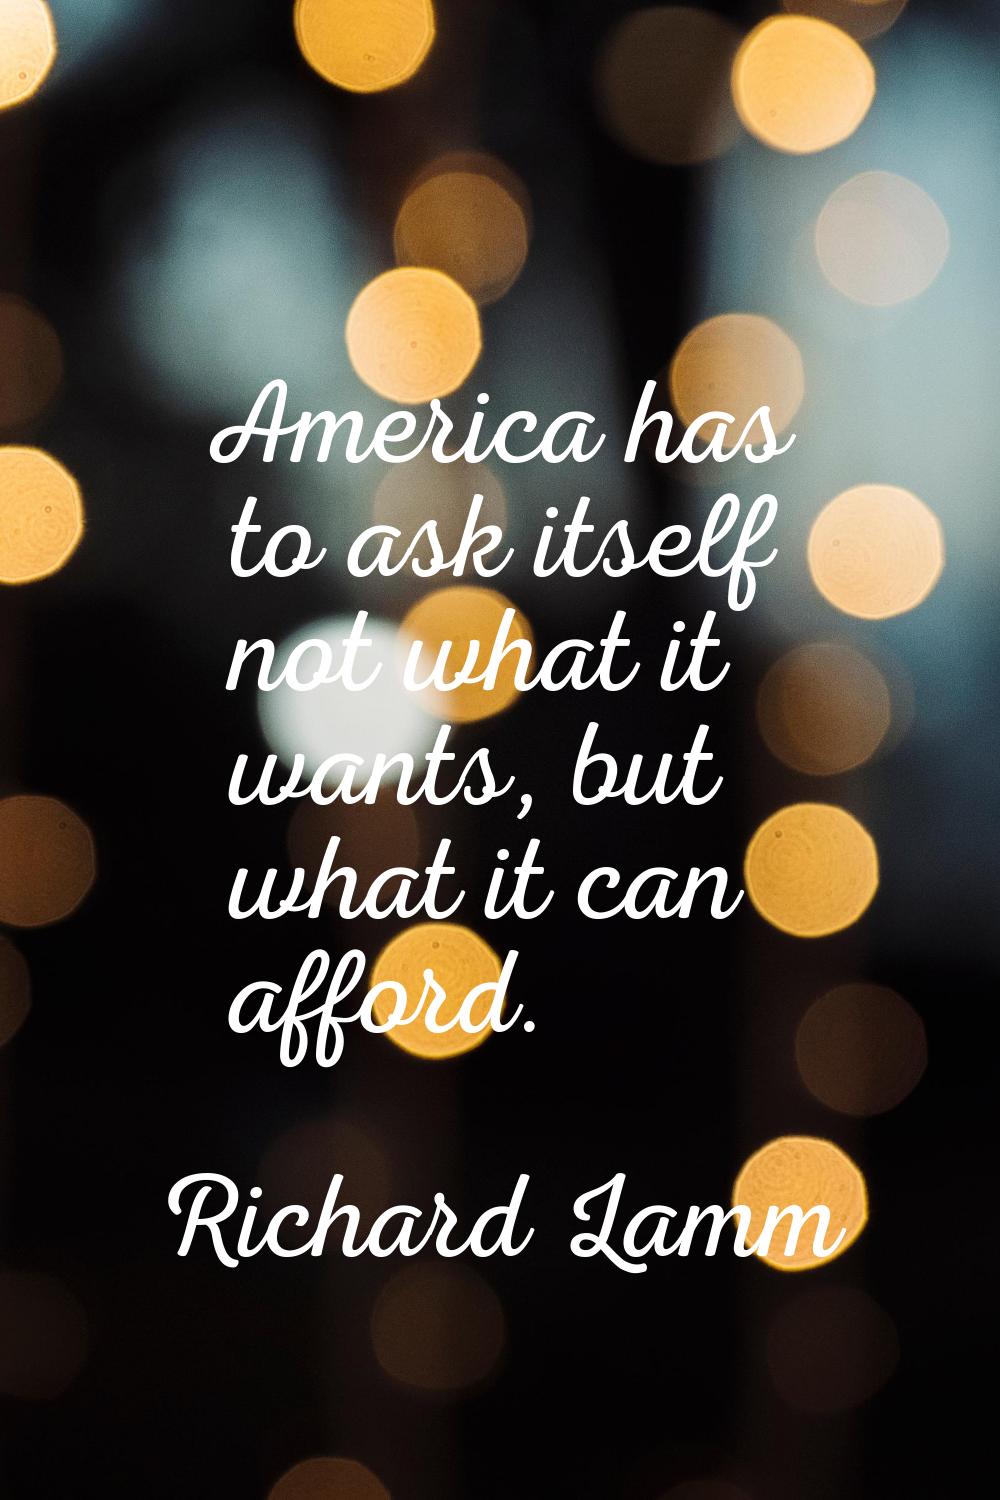 America has to ask itself not what it wants, but what it can afford.